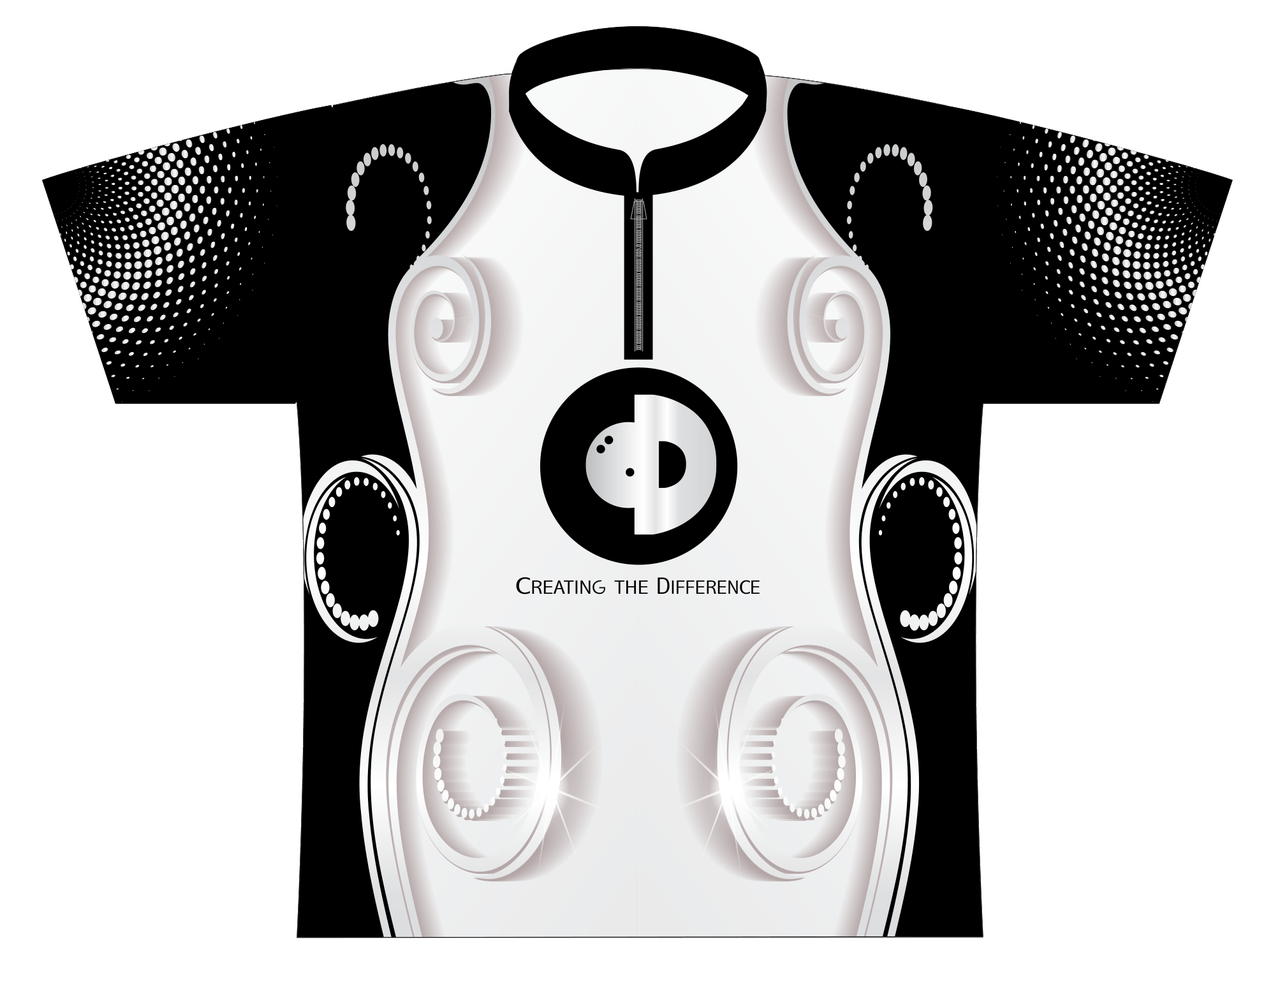 White Swirl Logo - Creating the Difference Black/White Swirl Dye Sublimated Jersey ...